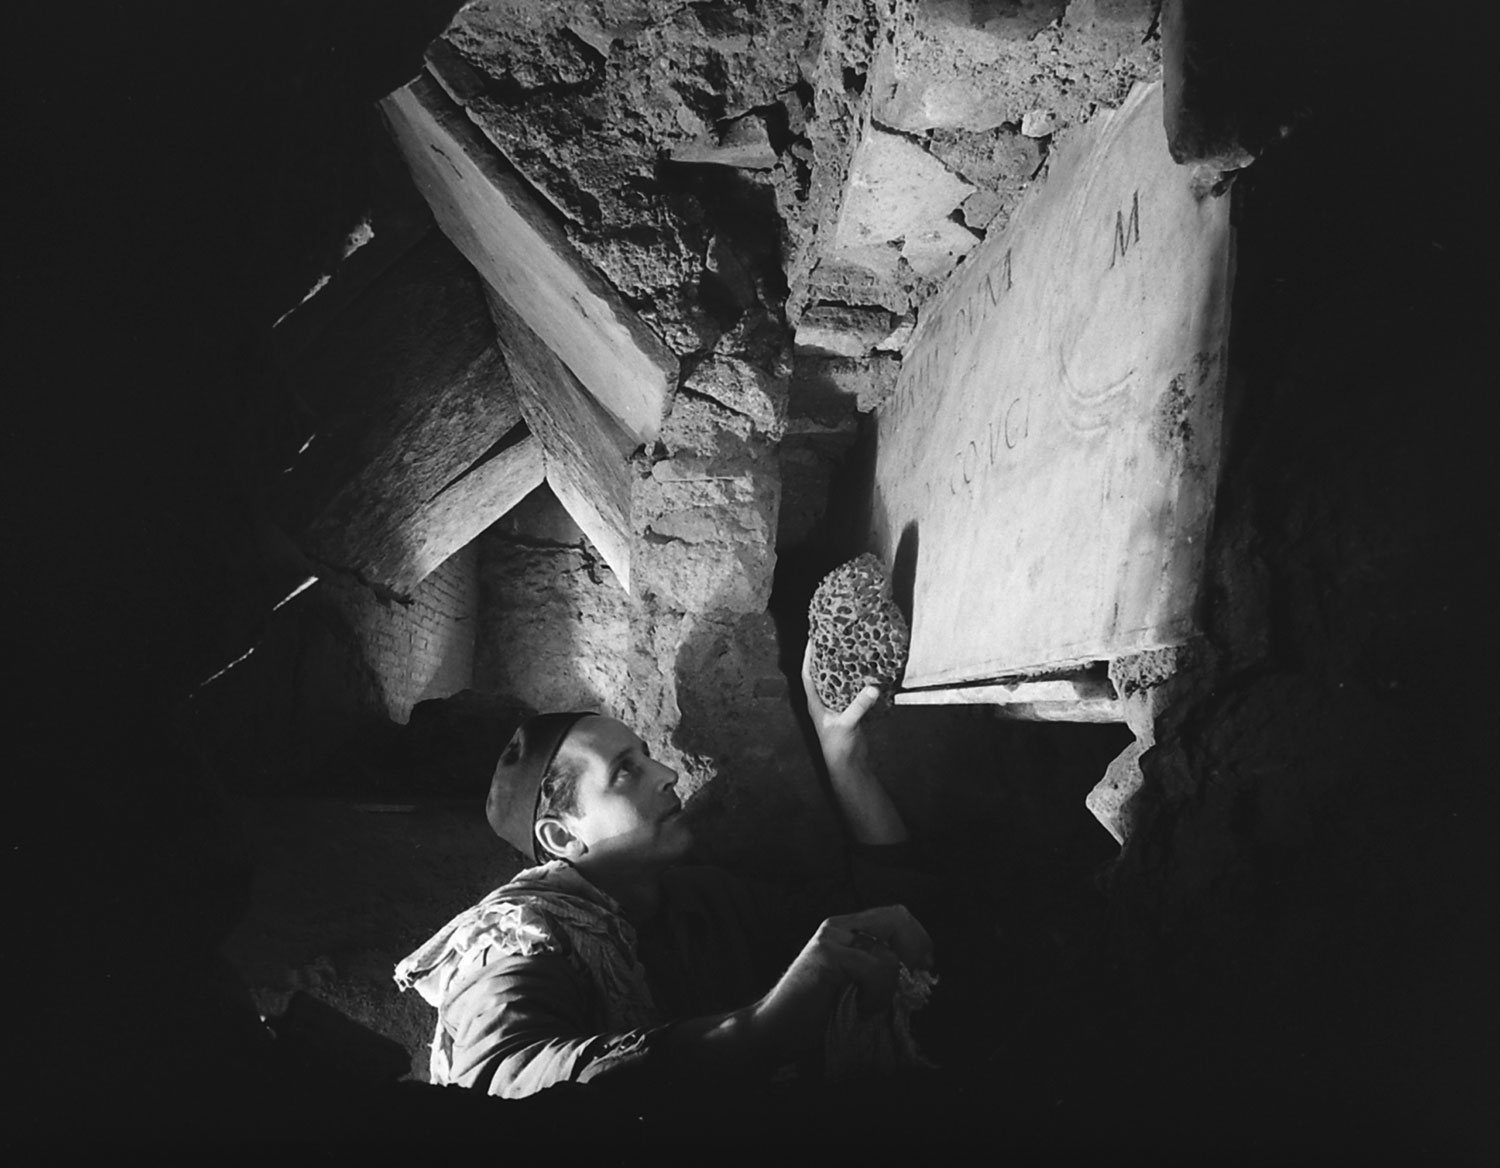 A workman cleans an inscription during the excavation beneath St. Peter's in Rome, 1950.